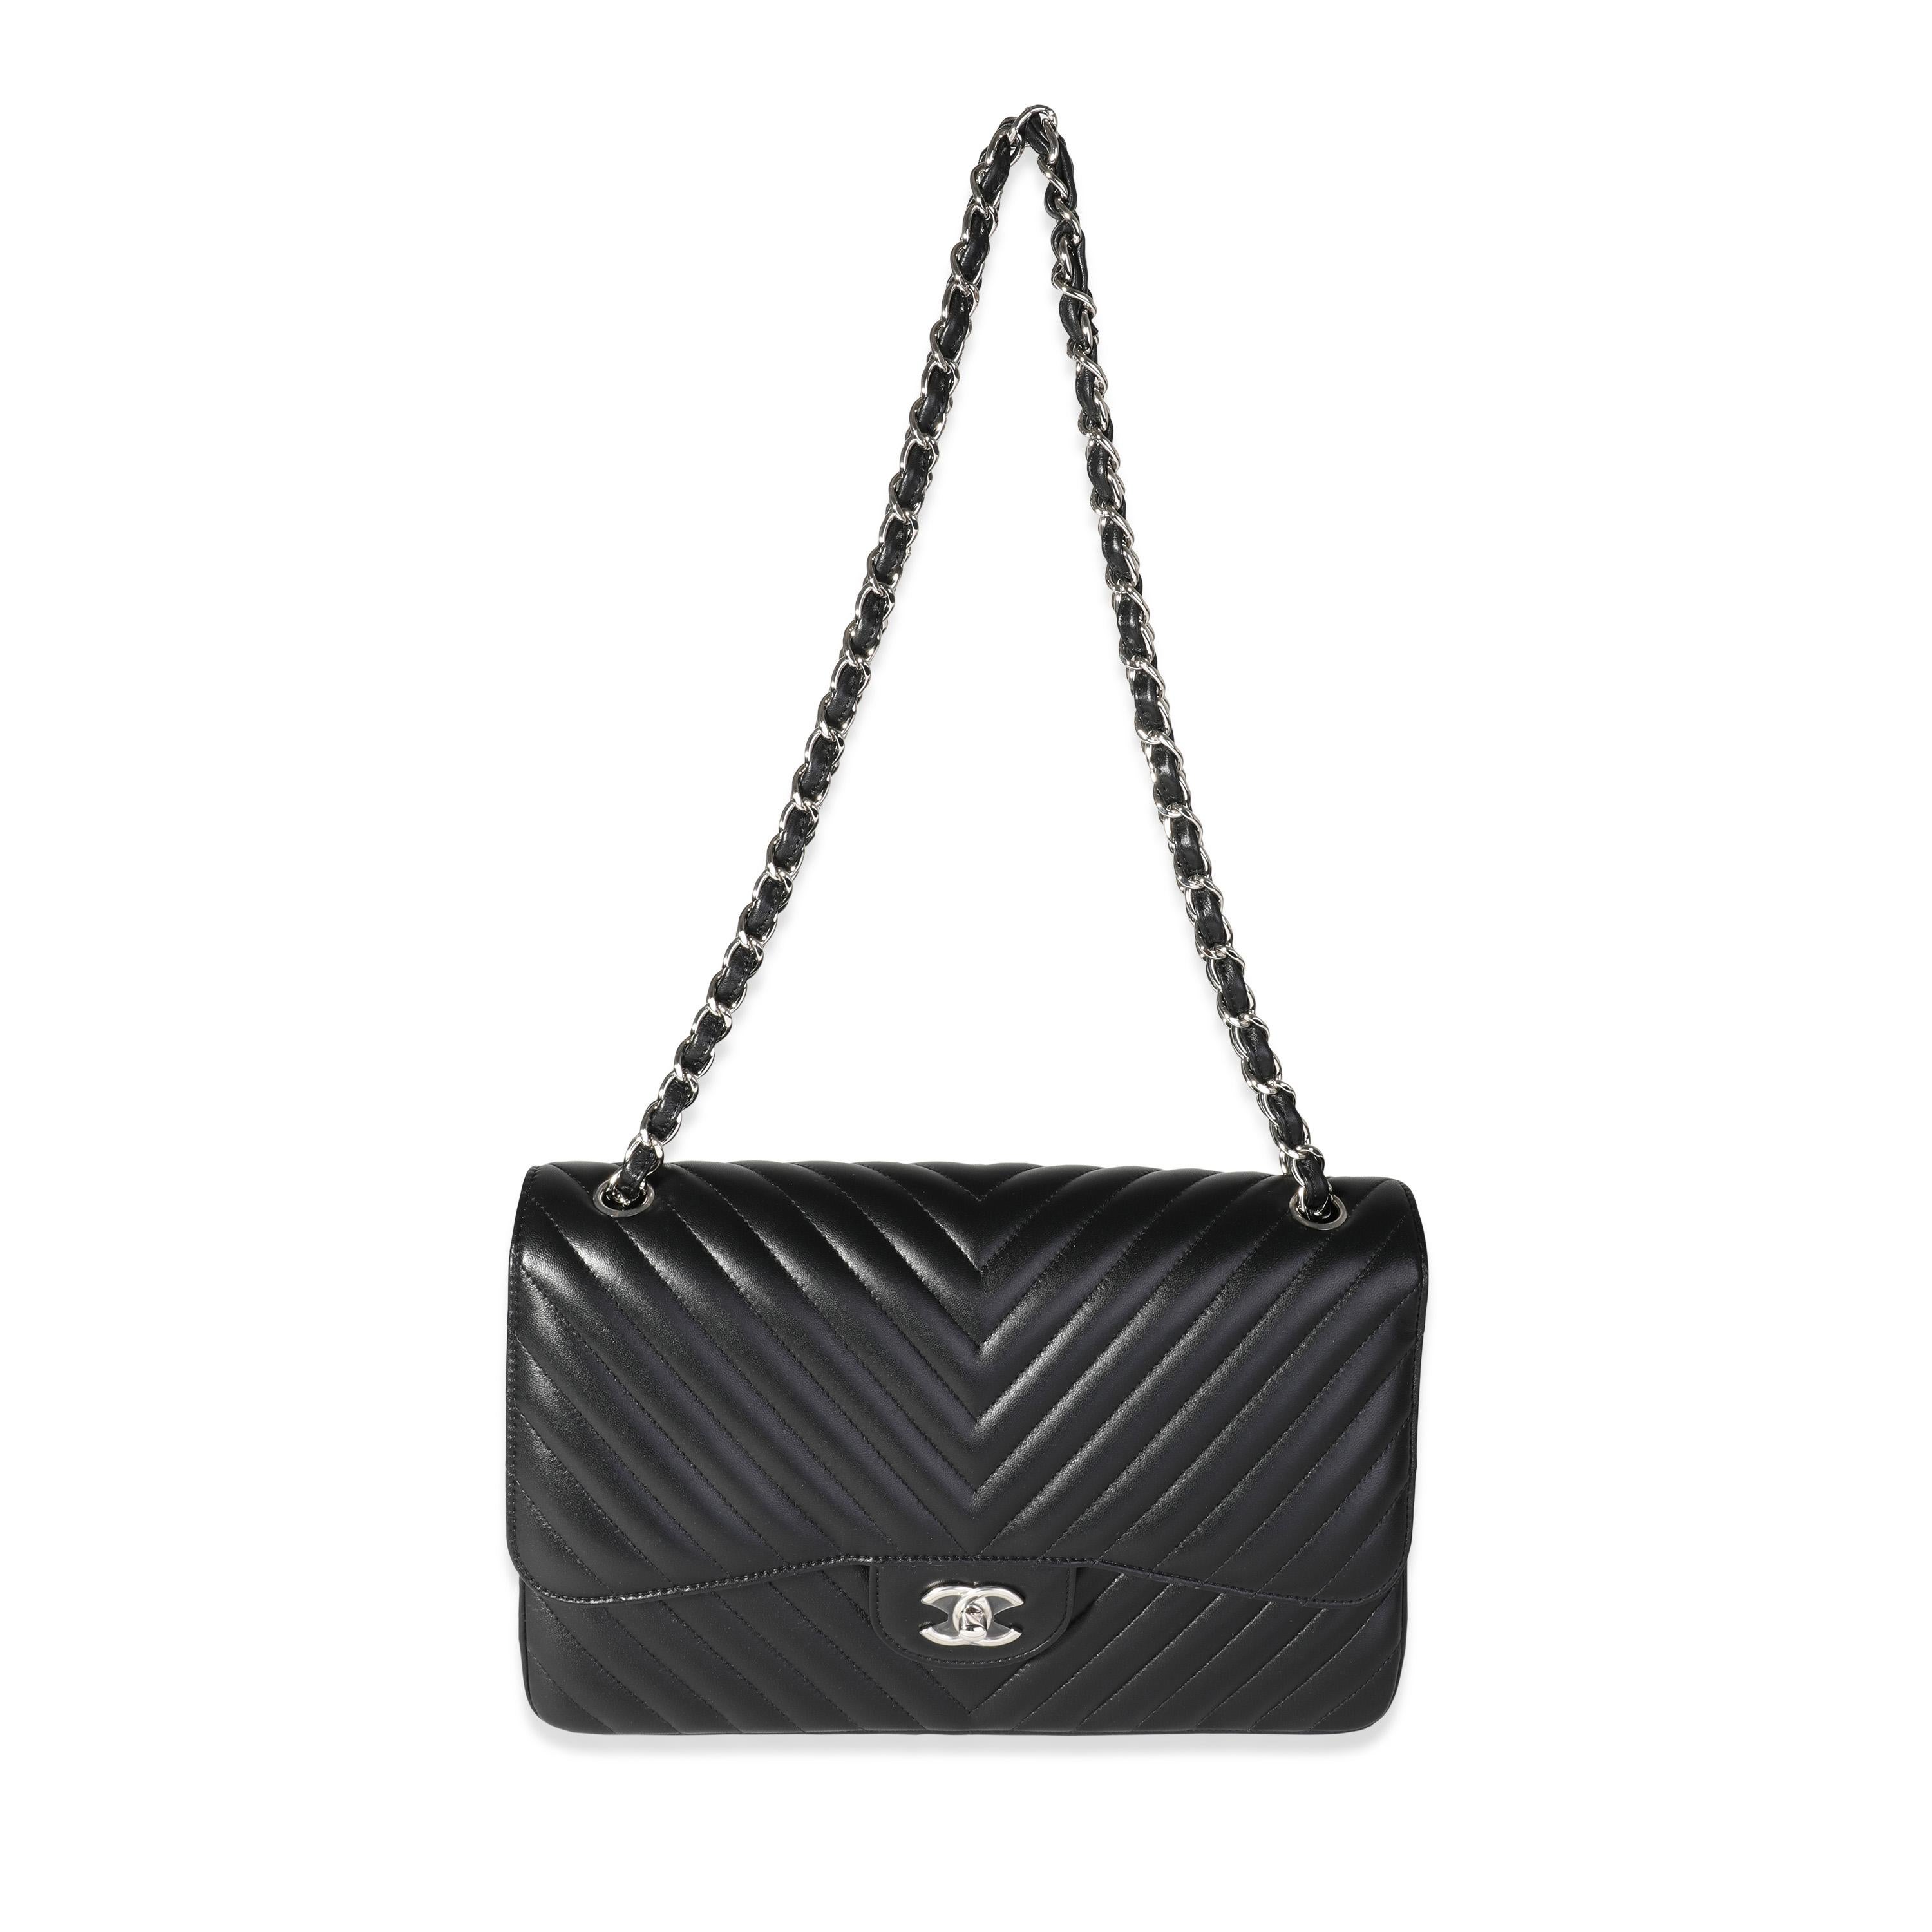 Listing Title: Chanel Black Chevron Quilted Classic Jumbo Double Flap
SKU: 118785
MSRP: 9500.00
Condition: Pre-owned (3000)
Handbag Condition: Never Worn
Brand: Chanel
Origin Country: Italy
Handbag Silhouette: Shoulder Bag
Occasions: